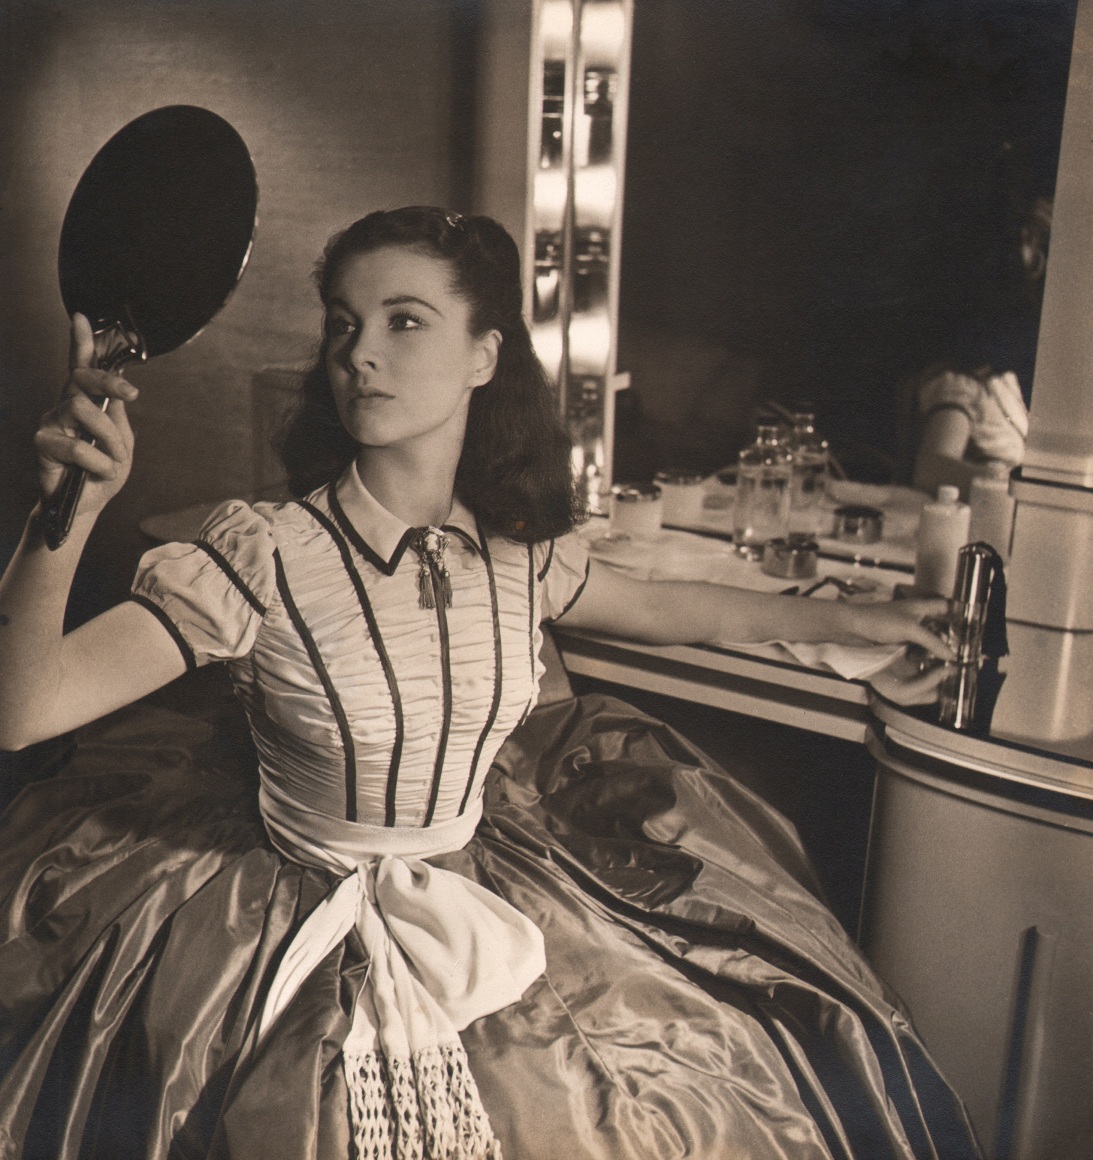 22. Louise Dahl-Wolfe, Vivien Leigh, c. 1939. A woman seated at a vanity holds up a small mirror to the left of the frame to look at her reflection.